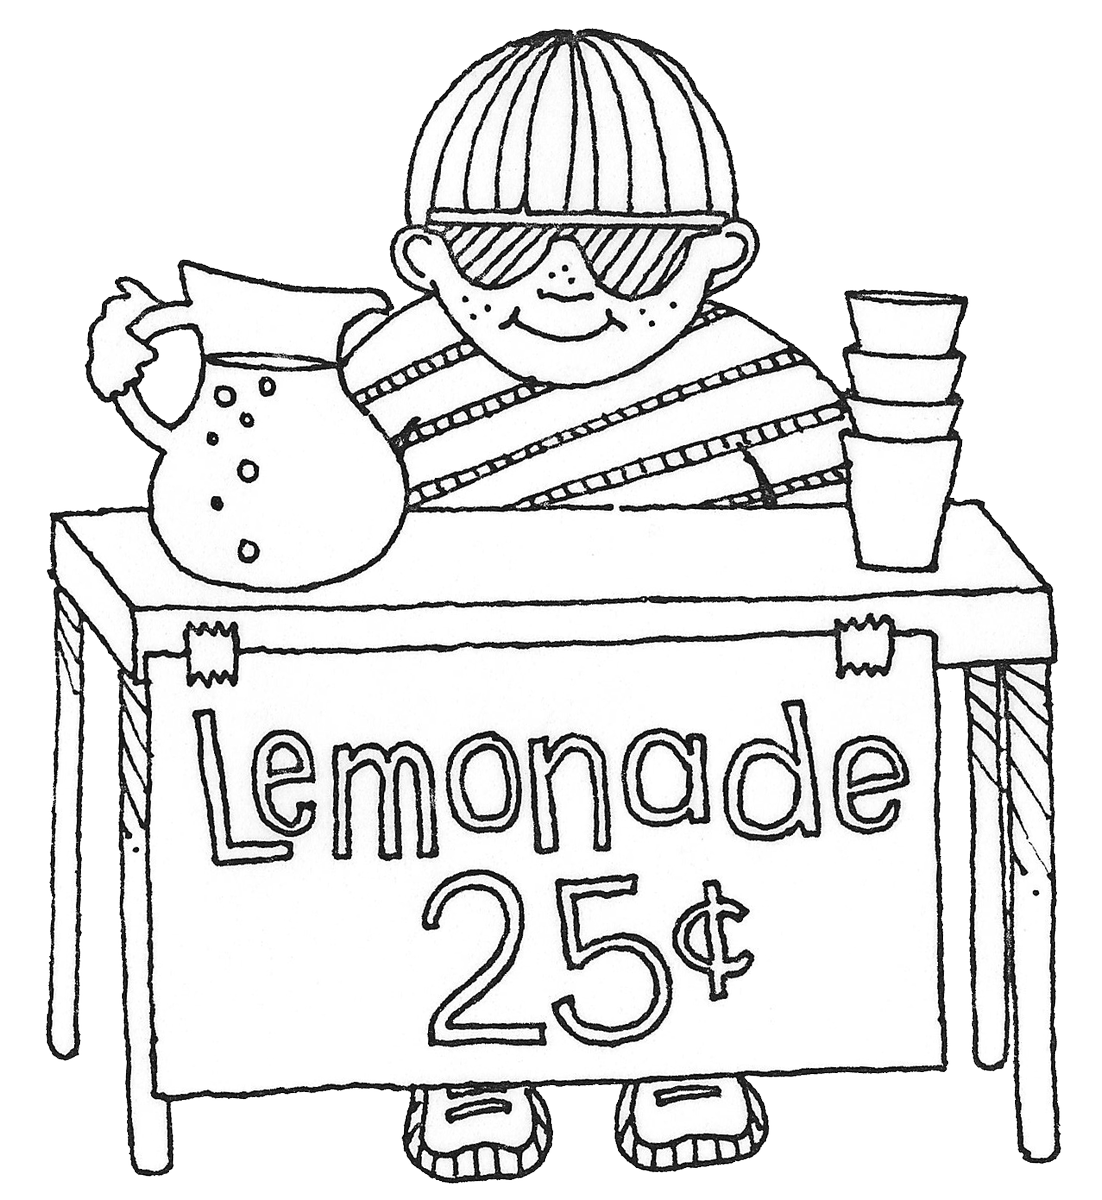 What better way for kids to learn about finance & business than starting a lemonade stand? #financialliteracy #teachingmath #teachingbusiness #youngentrepreneurs #taxday #parents #kids #childhoodunplugged #tuesdaythoughts #youngminds